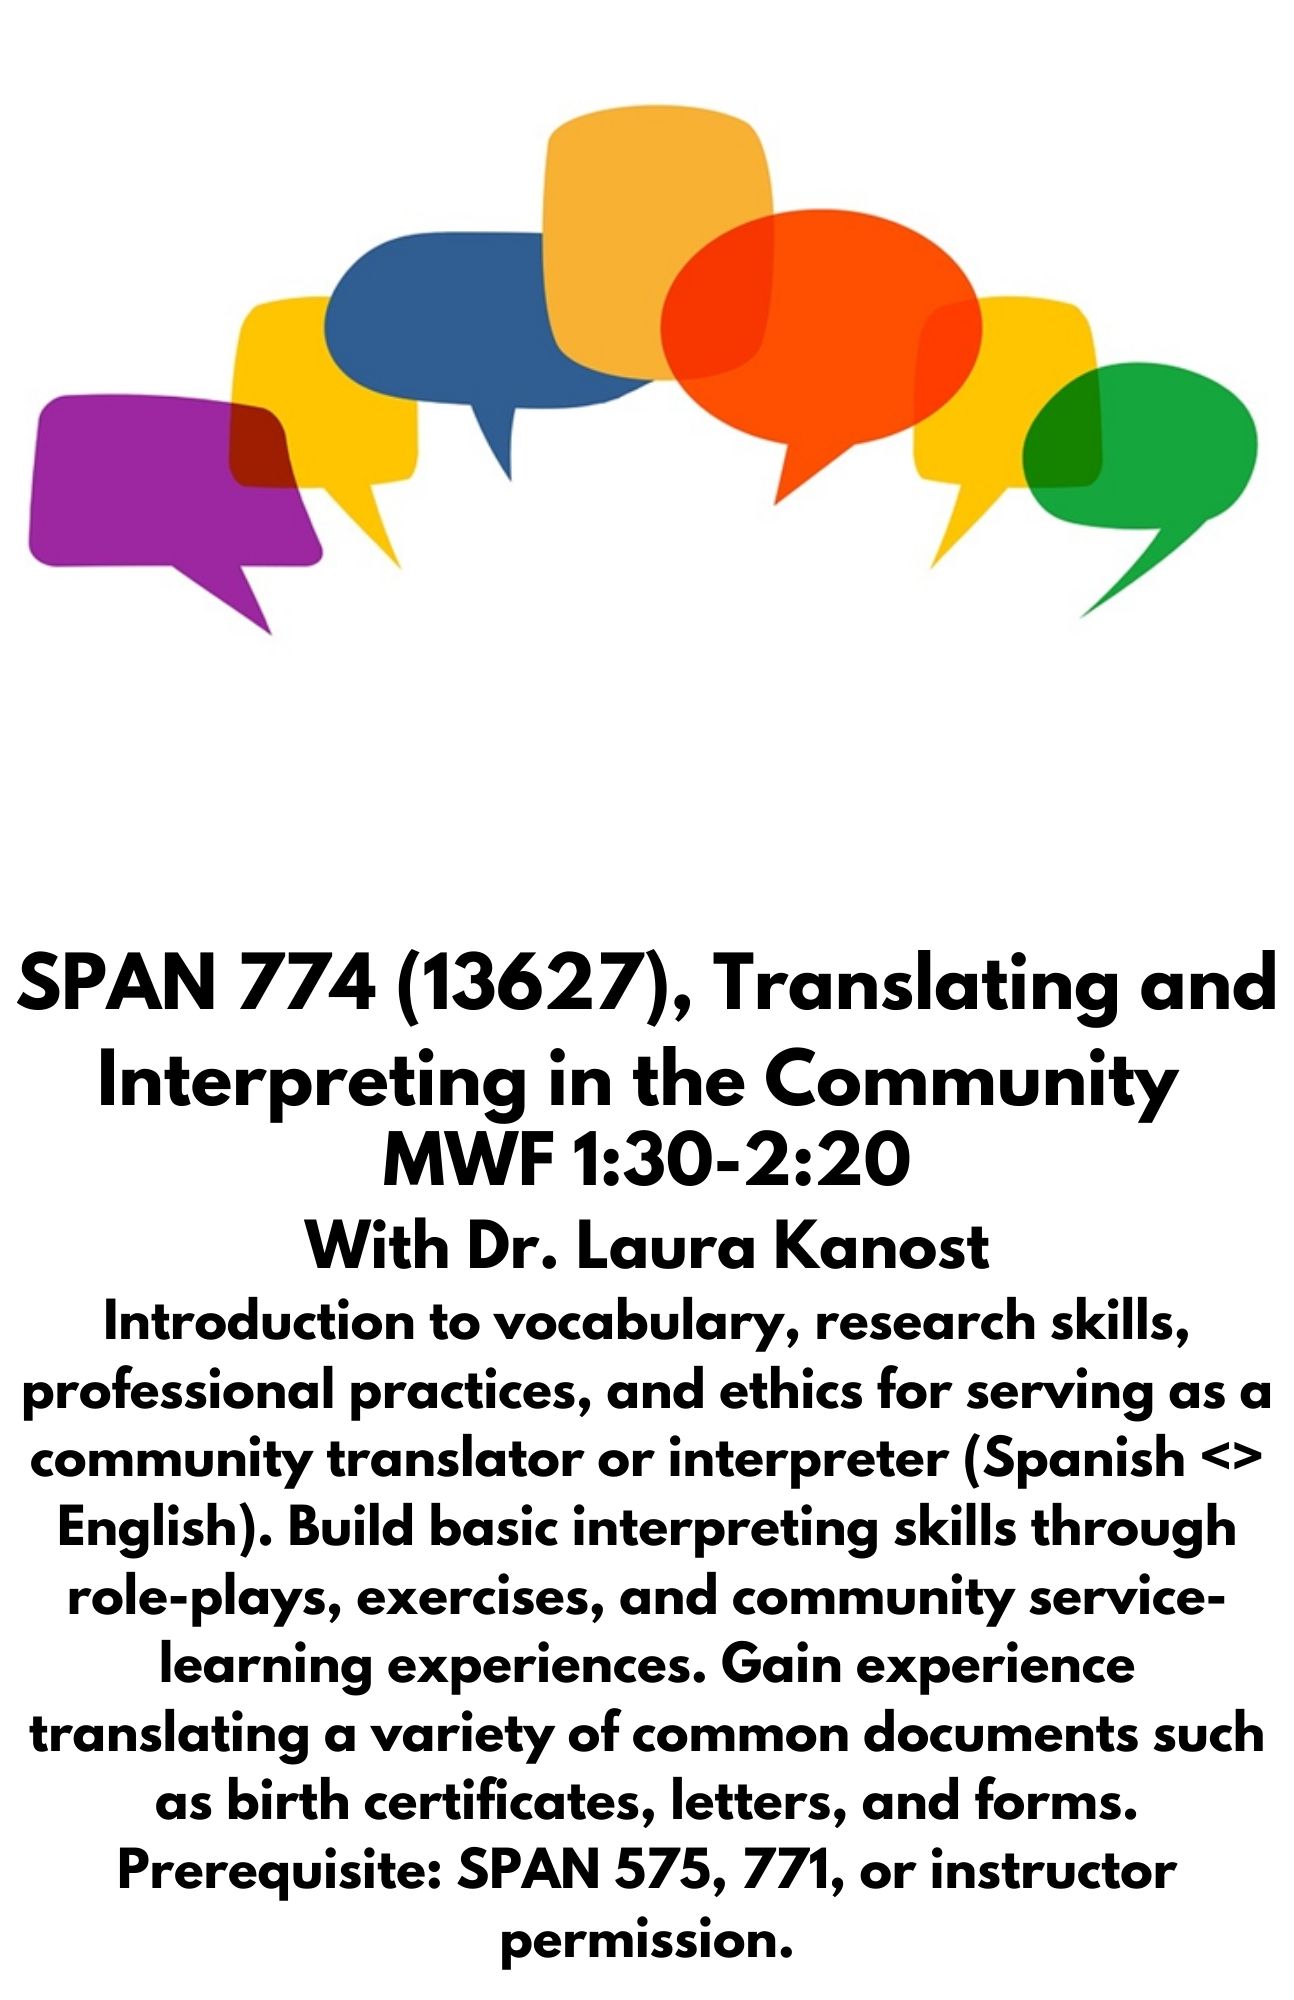 SPAN 774 (13627), Translating and Interpreting in the Community. MWF 1:30-2:20 With Dr. Laura Kanost Introduction to vocabulary, research skills, professional practices, and ethics for serving as a community translator or interpreter (Spanish <> English). Build basic interpreting skills through role-plays, exercises, and community service-learning experiences. Gain experience translating a variety of common documents such as birth certificates, letters, and forms. Prerequisite: SPAN 575, 771, or instructor permission.